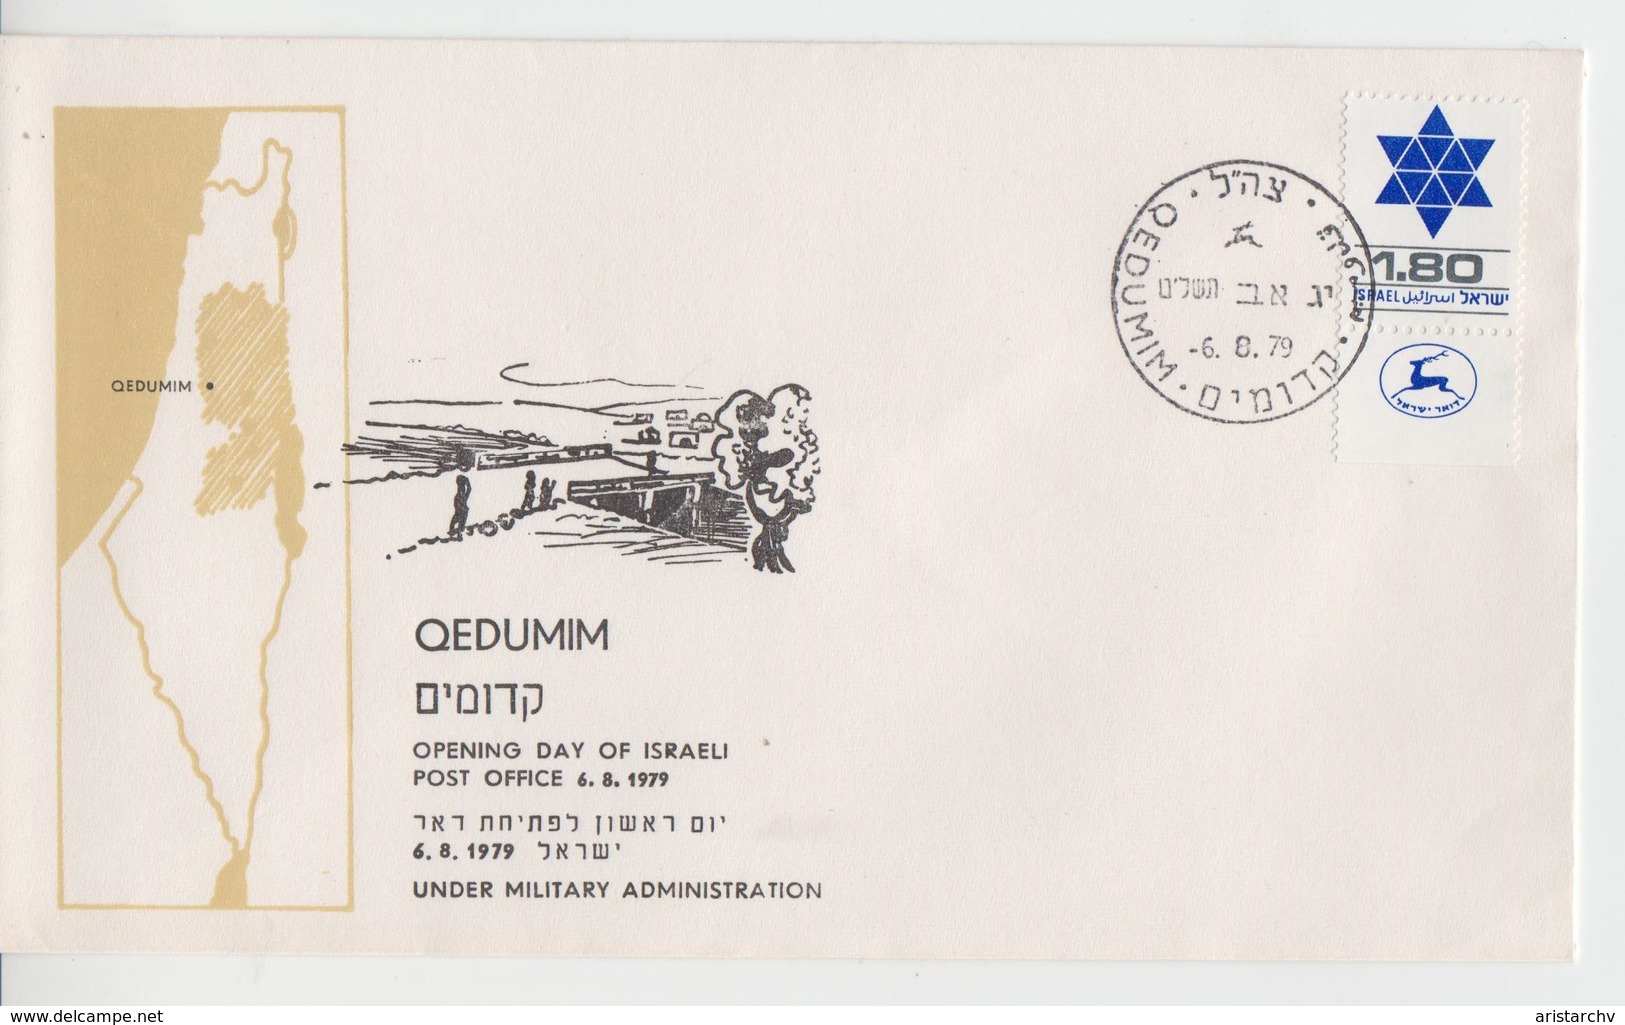 ISRAEL 1979 QEDUMIM OPENING DAY POST OFFICE TZAHAL IDF UNDER MILITARY ADMINISTRATION COVER - Postage Due